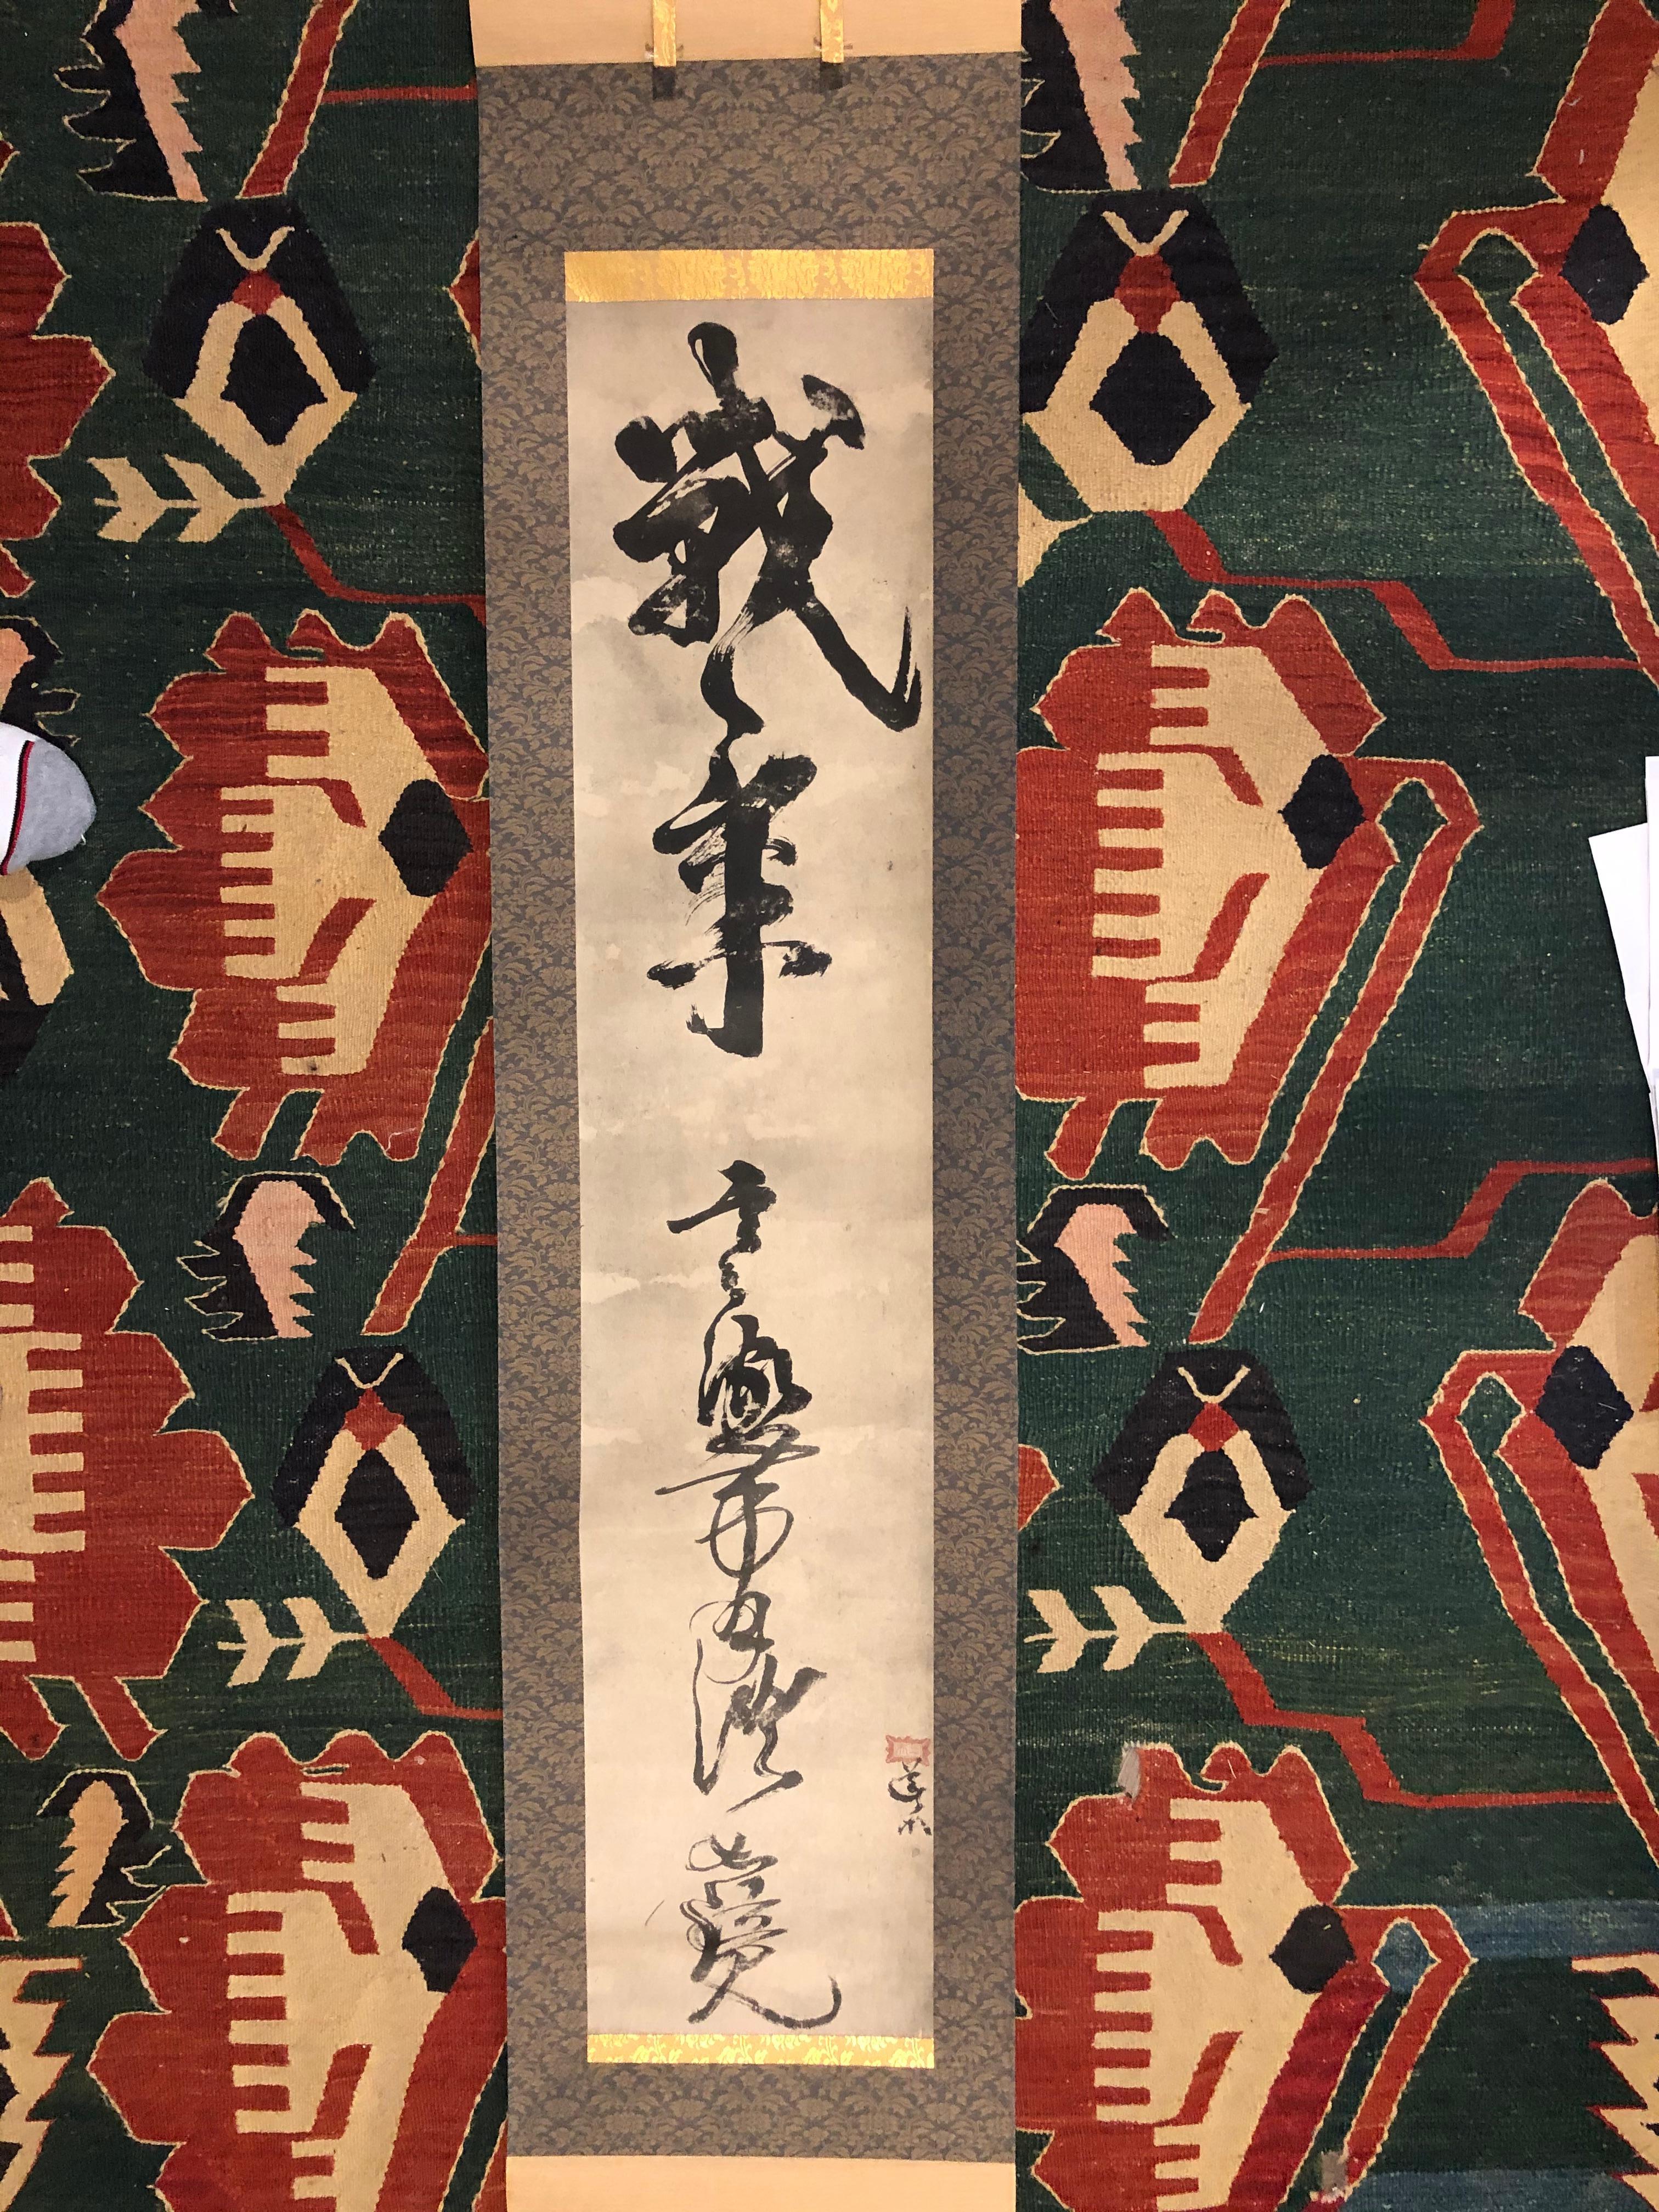 A gem from our recent Japanese Acquisitions Travels

A unique big and bold hand painted paper scroll of calligraphy - completely hand painted - from a Japanese artists' private collection and personal favorite. Impressive scale and detail. One of